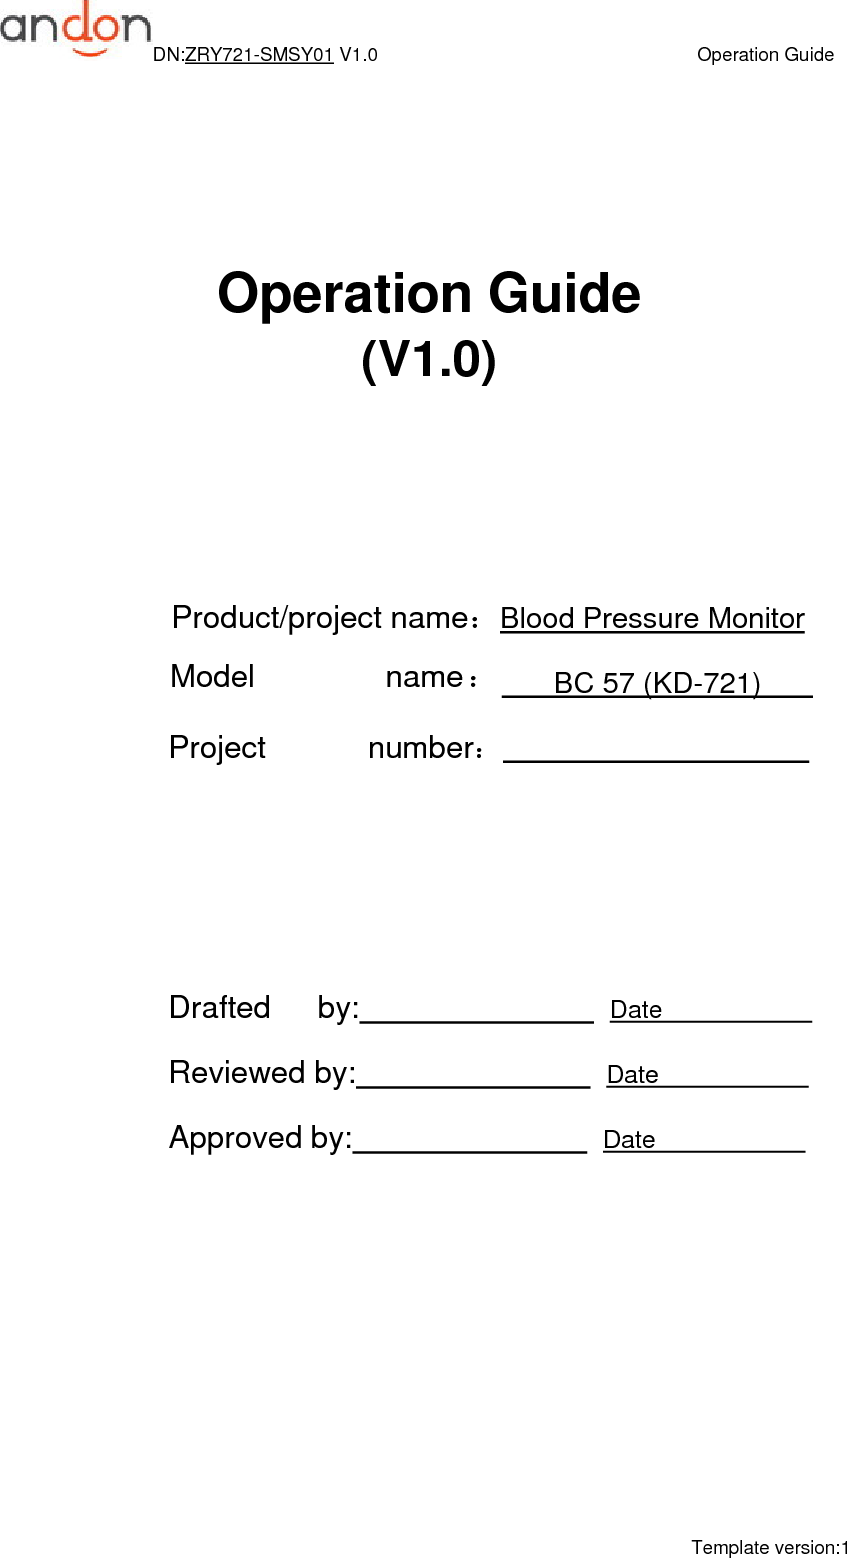 DN:ZRY721-SMSY01 V1.0                                                                    Operation Guide Template version:1    Operation Guide (V1.0)    Product/project name：Blood Pressure Monitor        BC 57 (KD-721)              Project              number：                         Drafted      by:                                Date             Reviewed by:                                Date             Approved by:                                Date                                                                 Model               name：